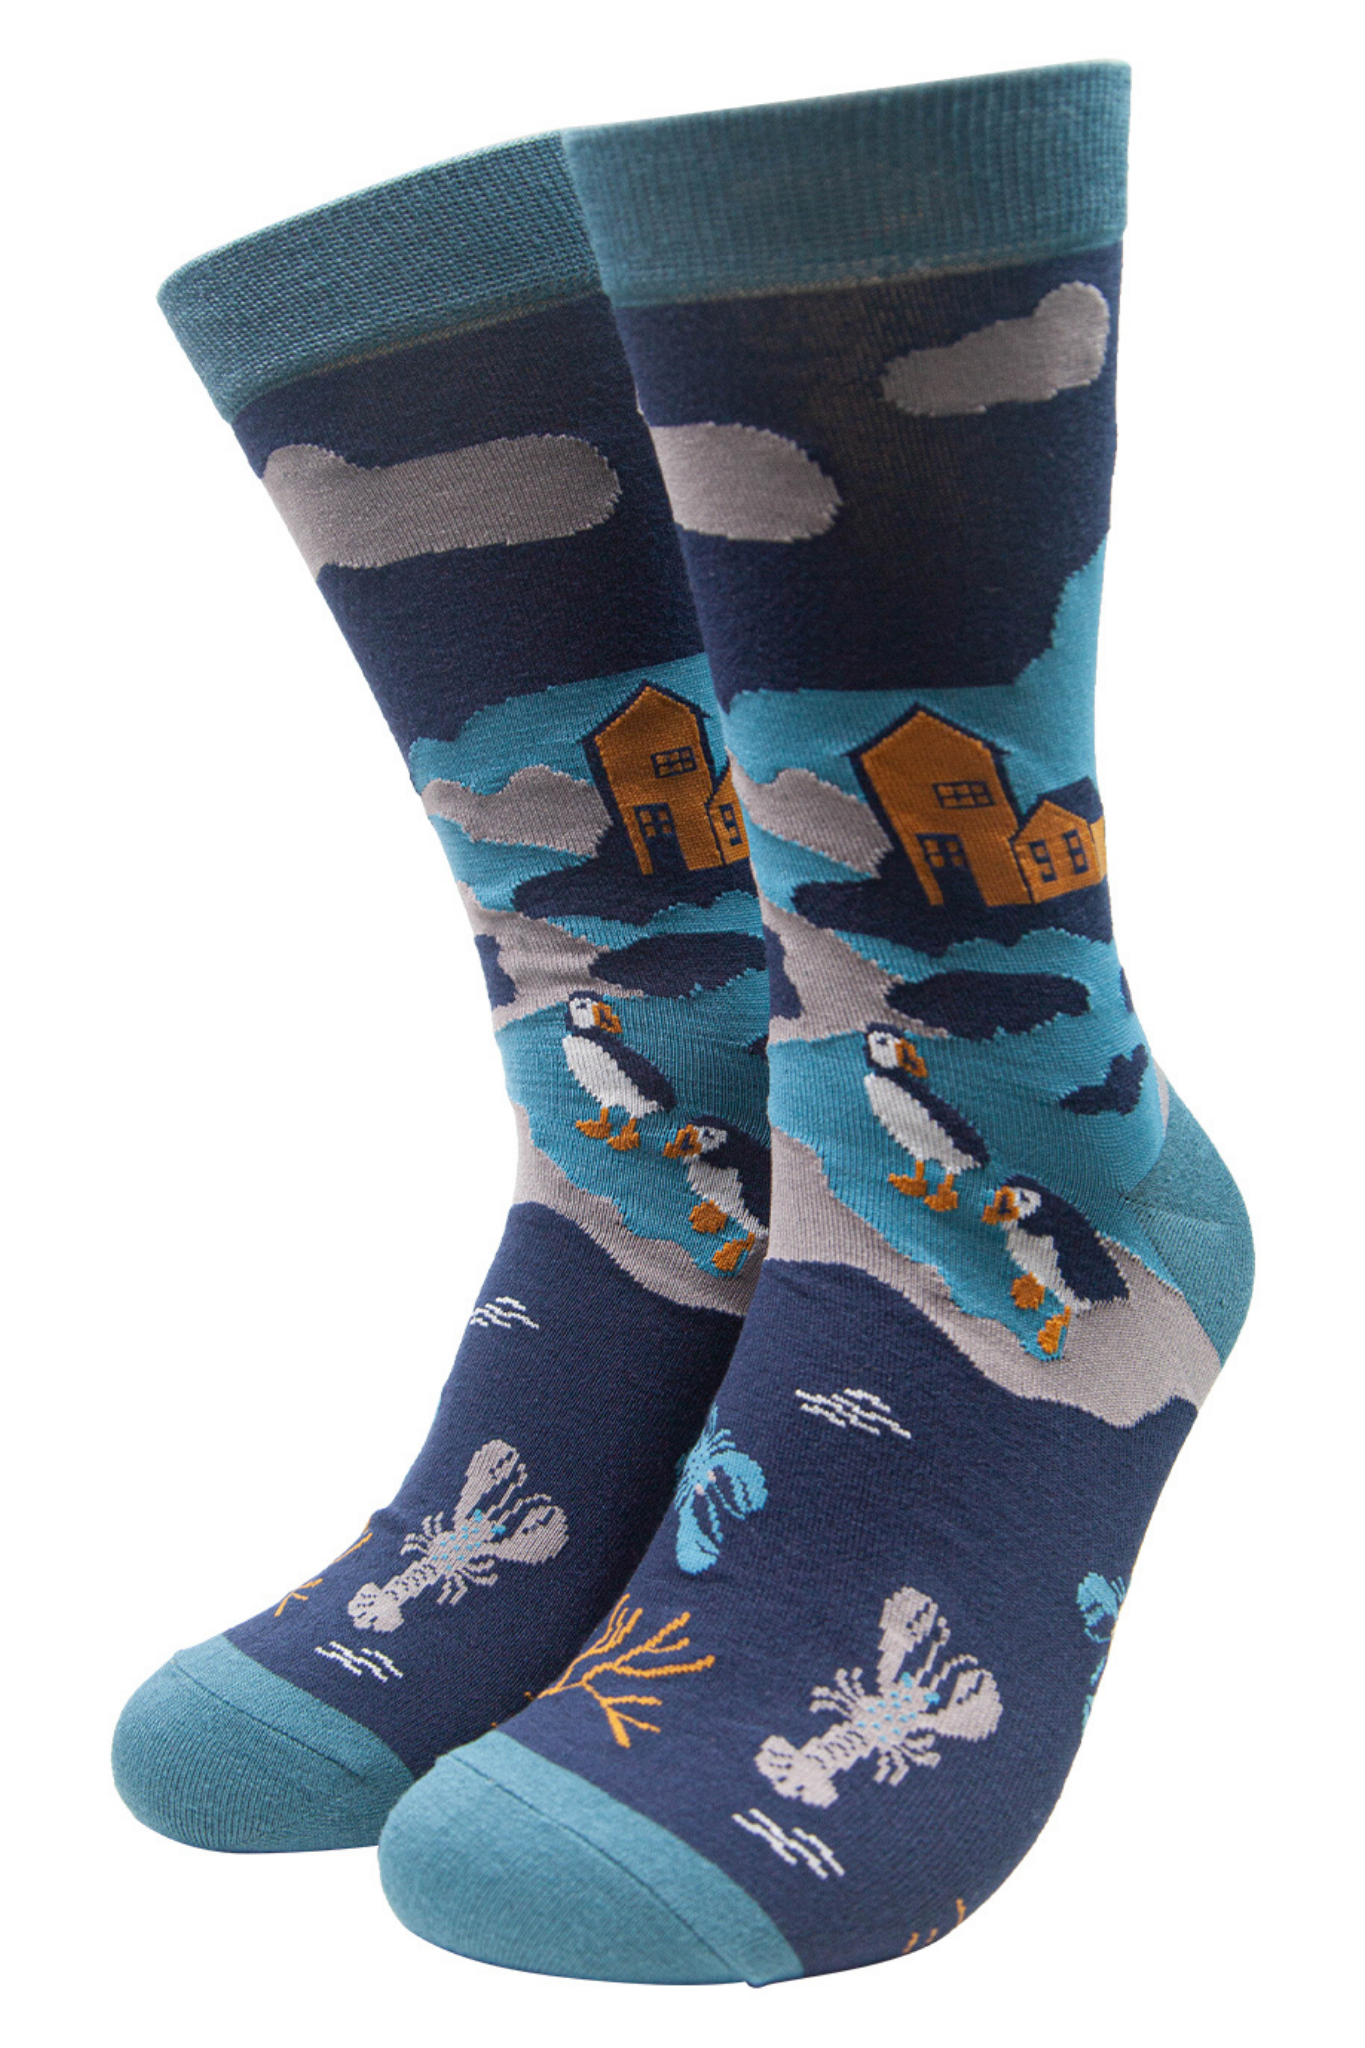 blue bamboo socks designed to look like a coastal scene with puffins, lobsters and a shoreline